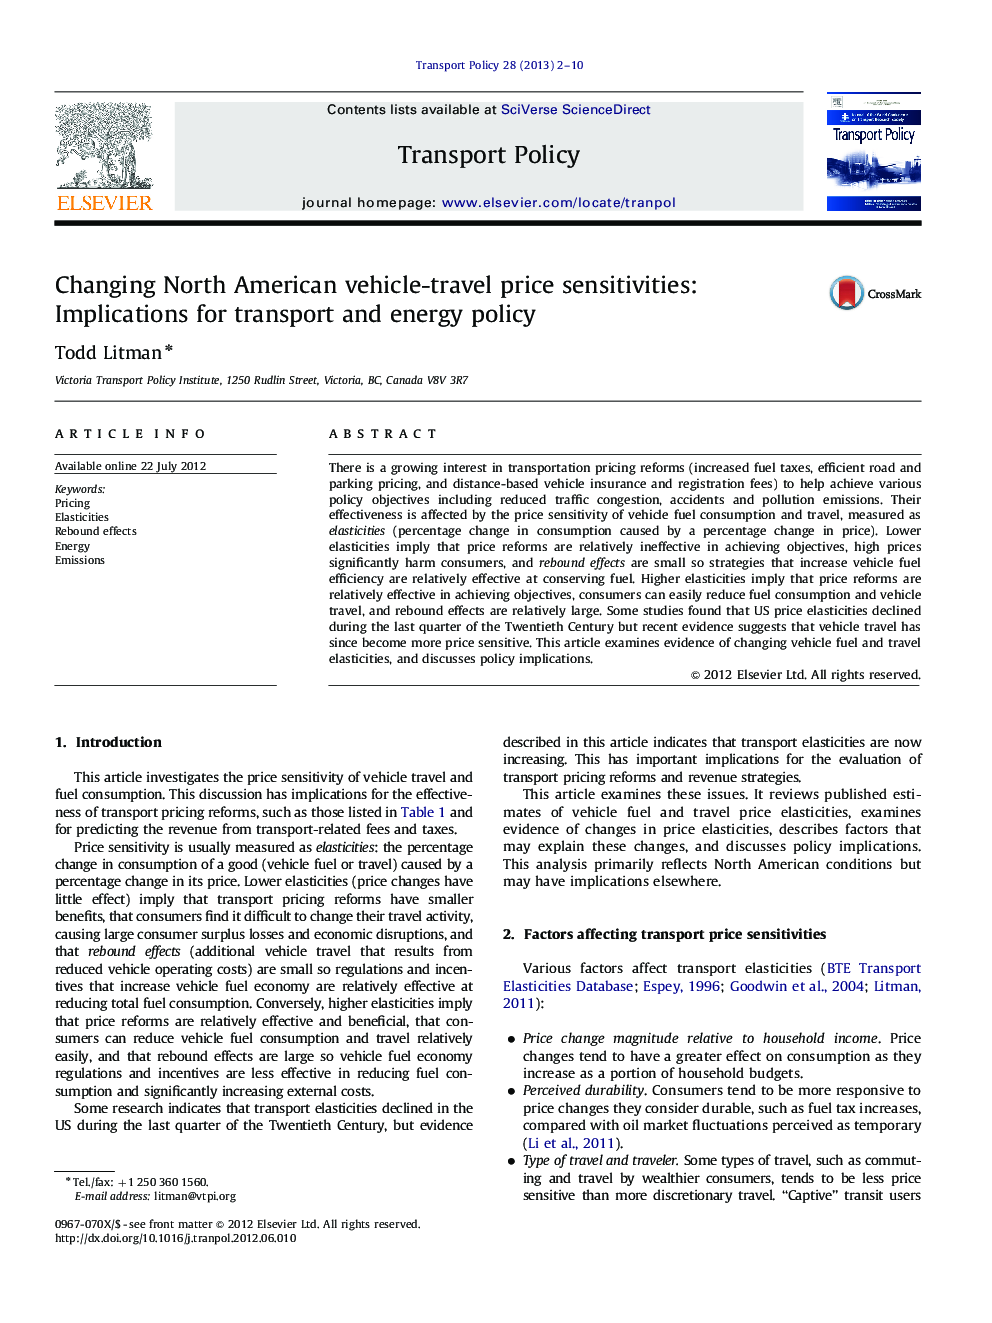 Changing North American vehicle-travel price sensitivities: Implications for transport and energy policy